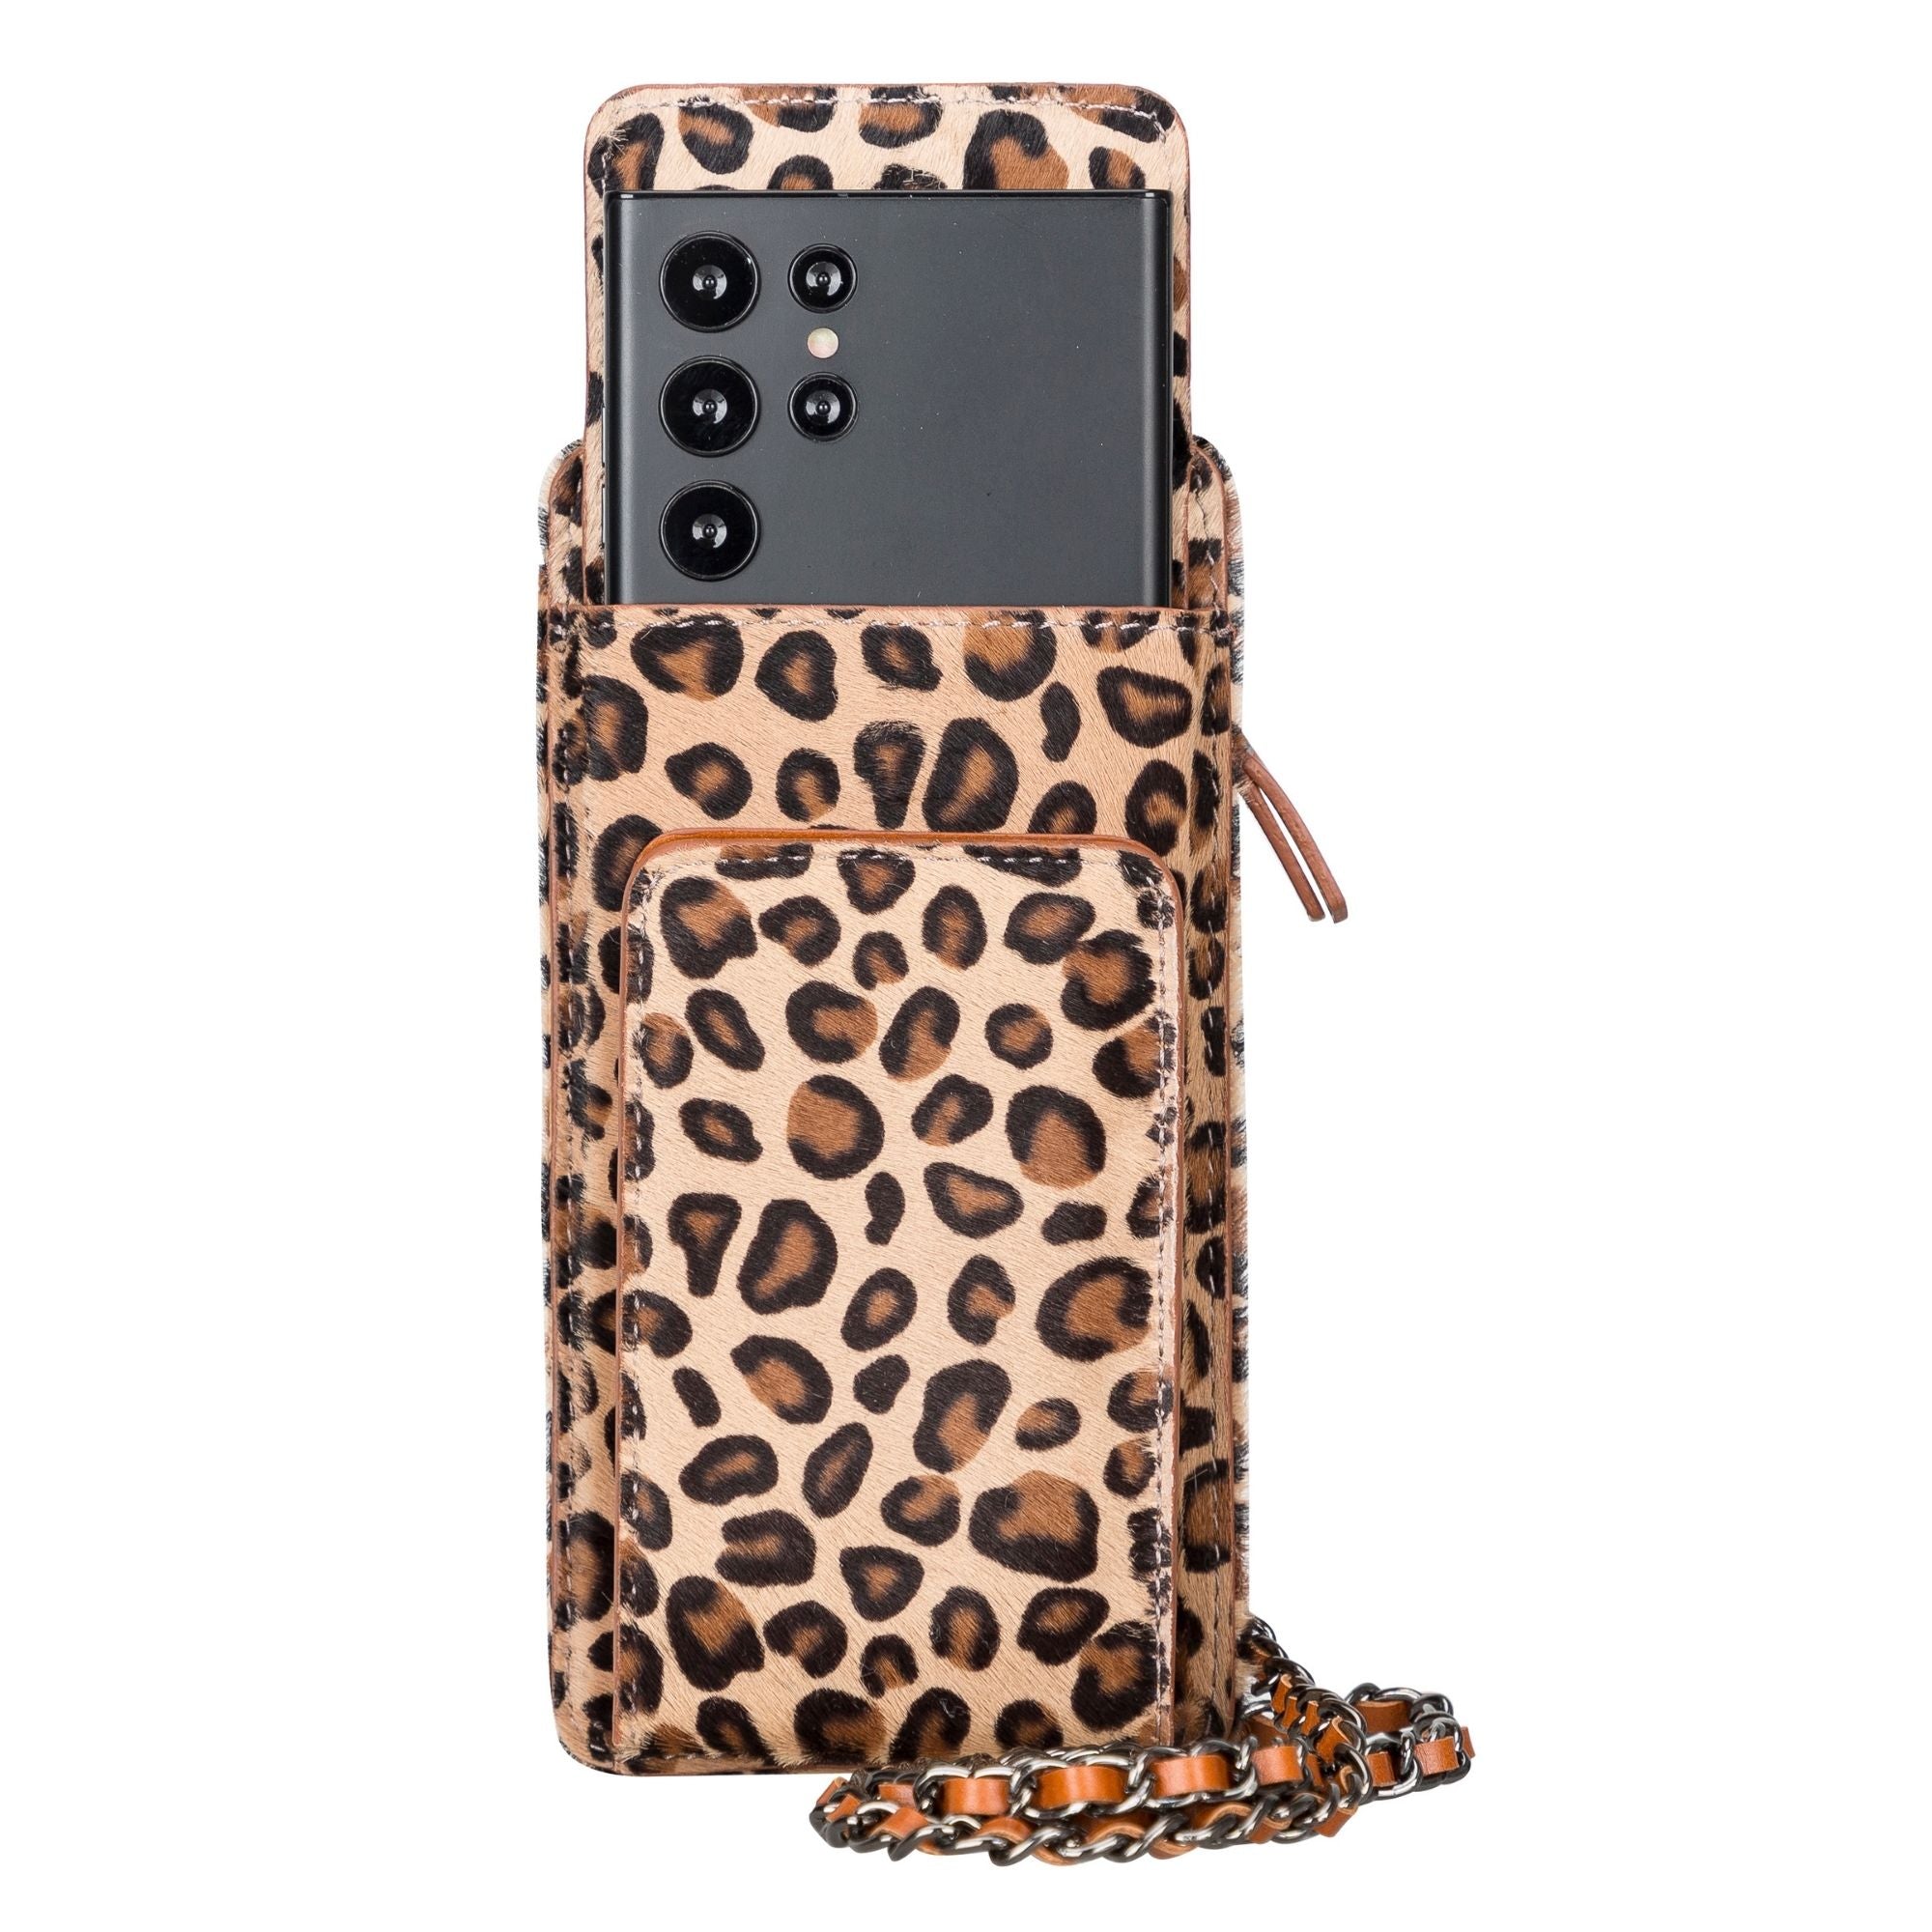 Lovell Leather Handbag with Phone Compartment and Shoulder Strap - Leopard Pattern - TORONATA